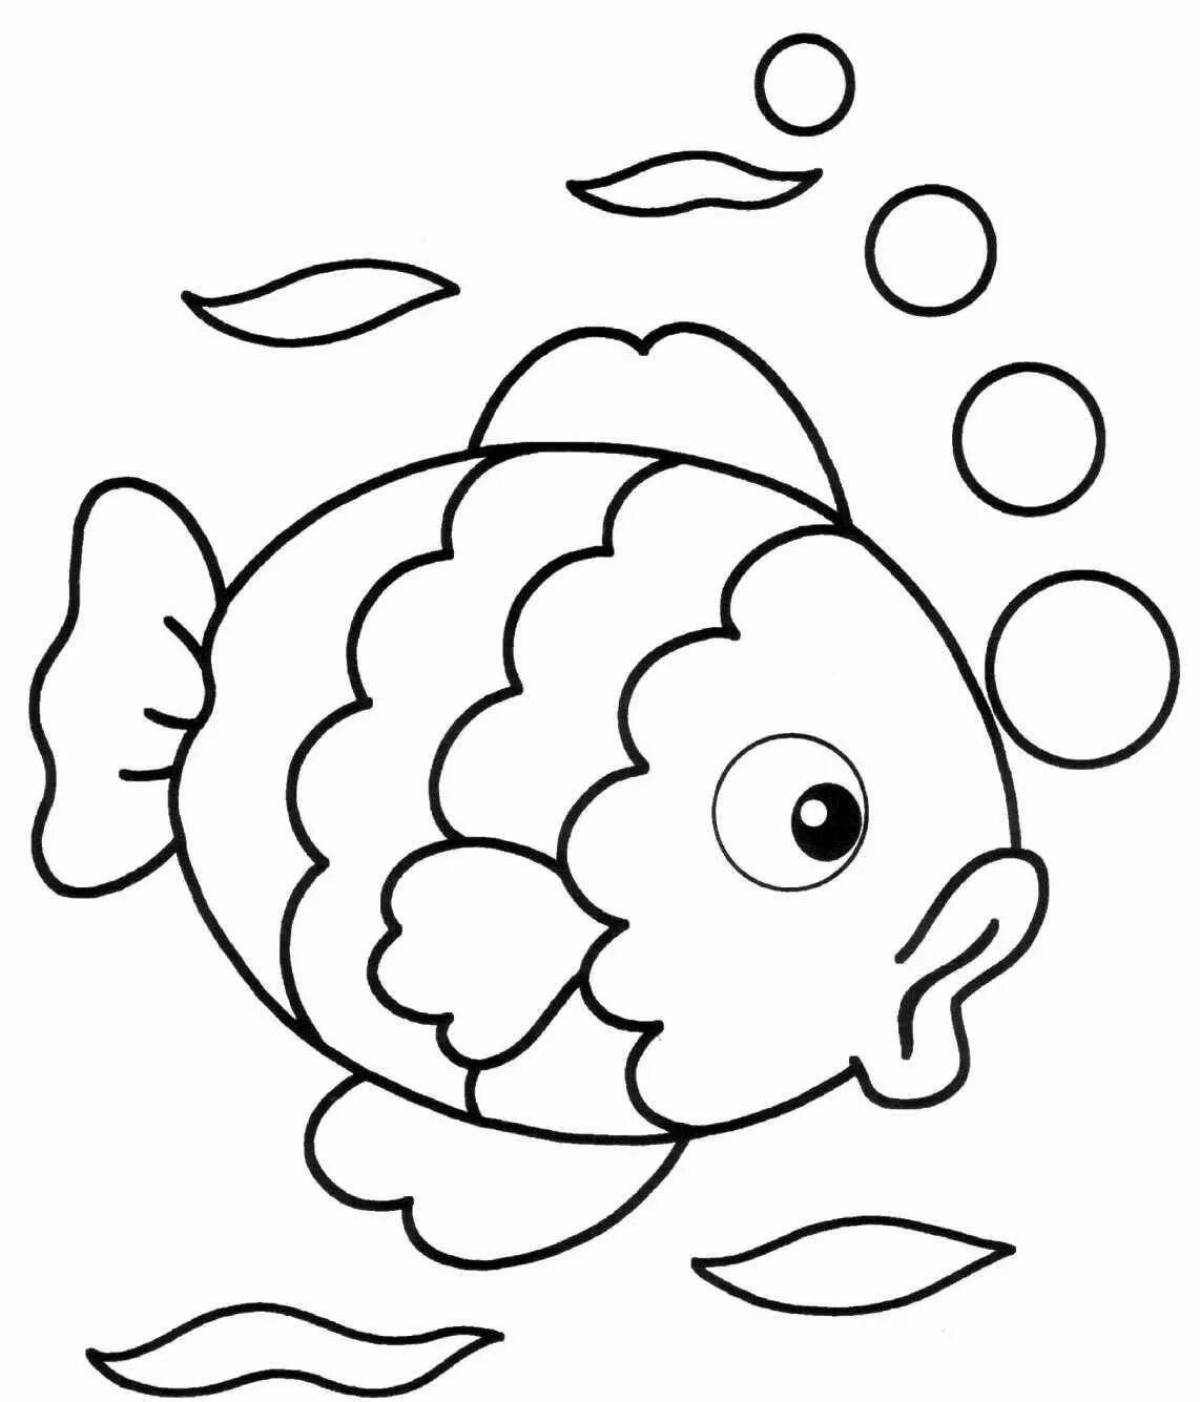 Fun coloring template for 3-4 year olds